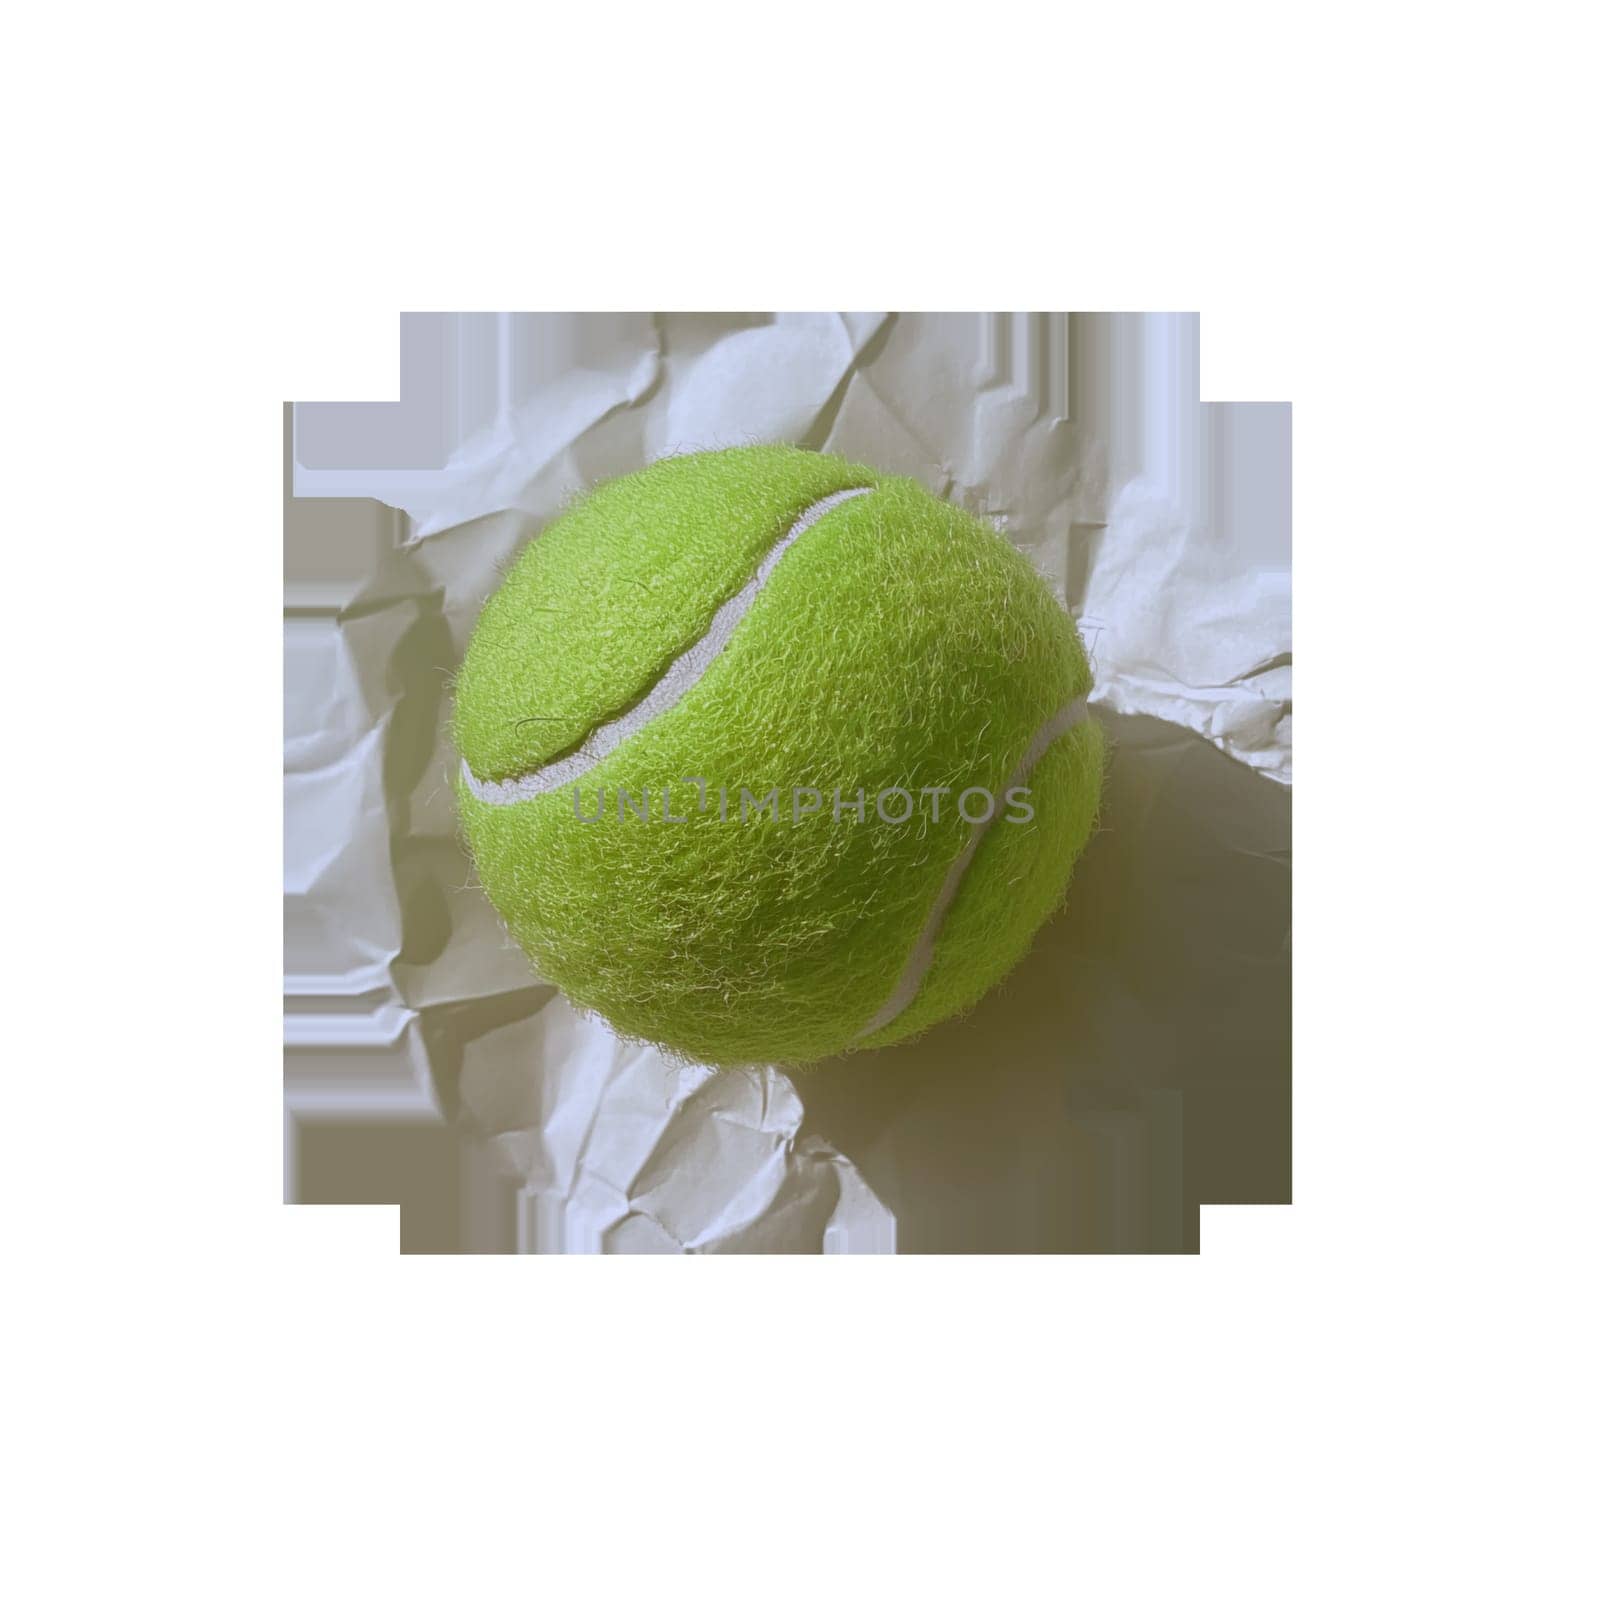 Tennis ball on crumpled paper cut out image by Dustick